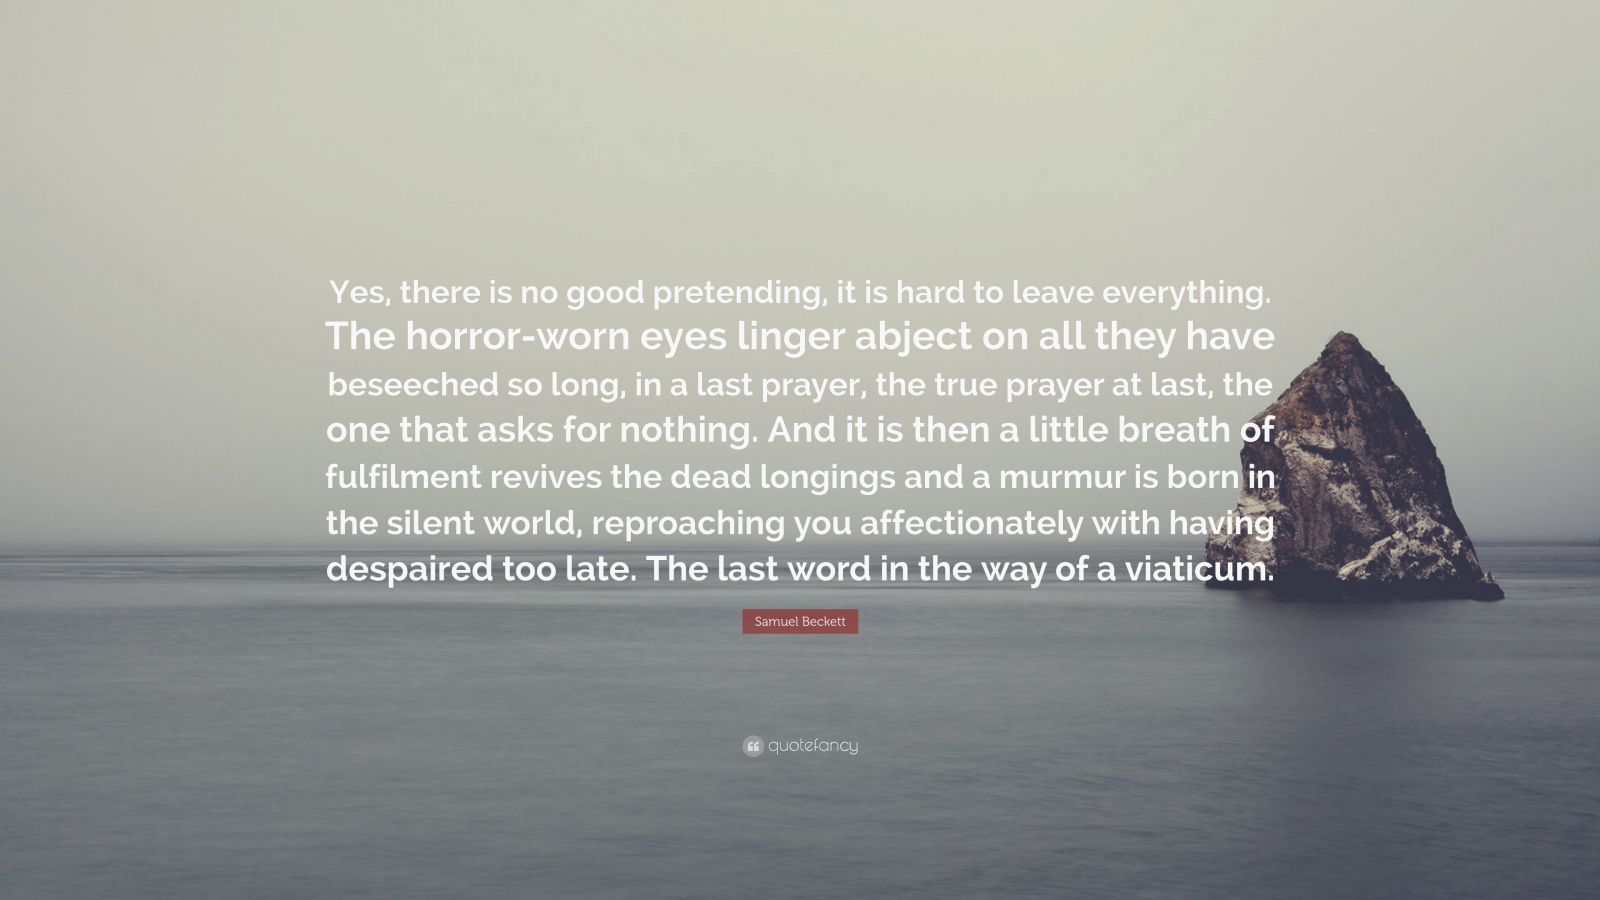 Samuel Beckett Quote: “Yes, there is no good pretending, it is hard to ...